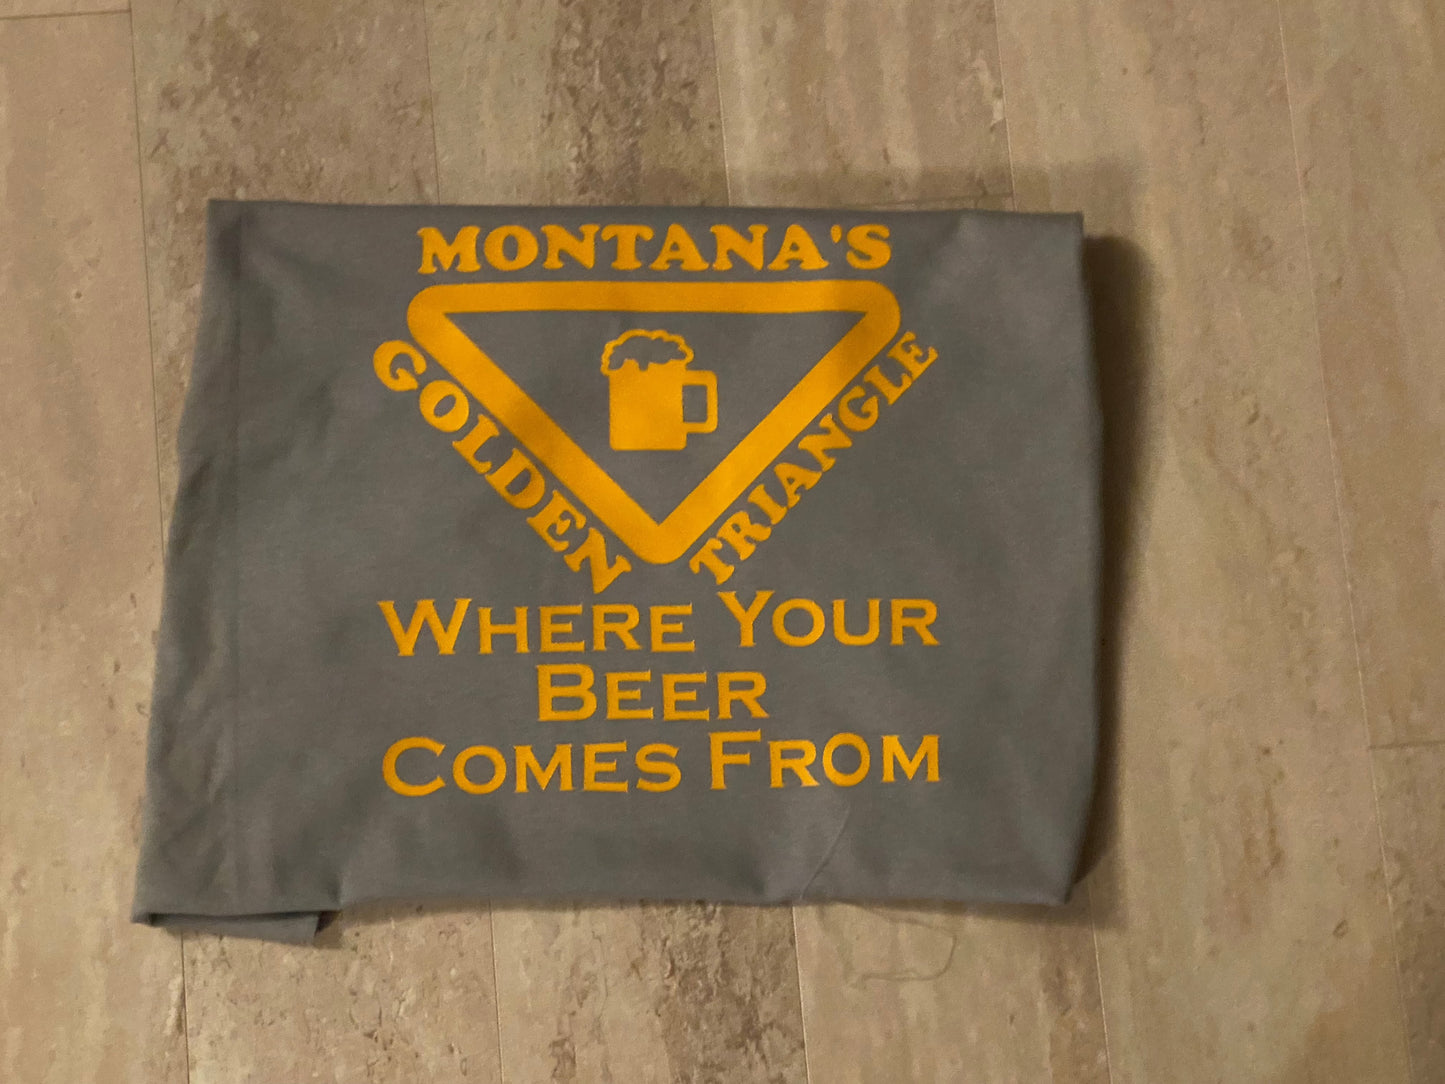 Montana’s Golden Triangle Where your beer comes from t shirt